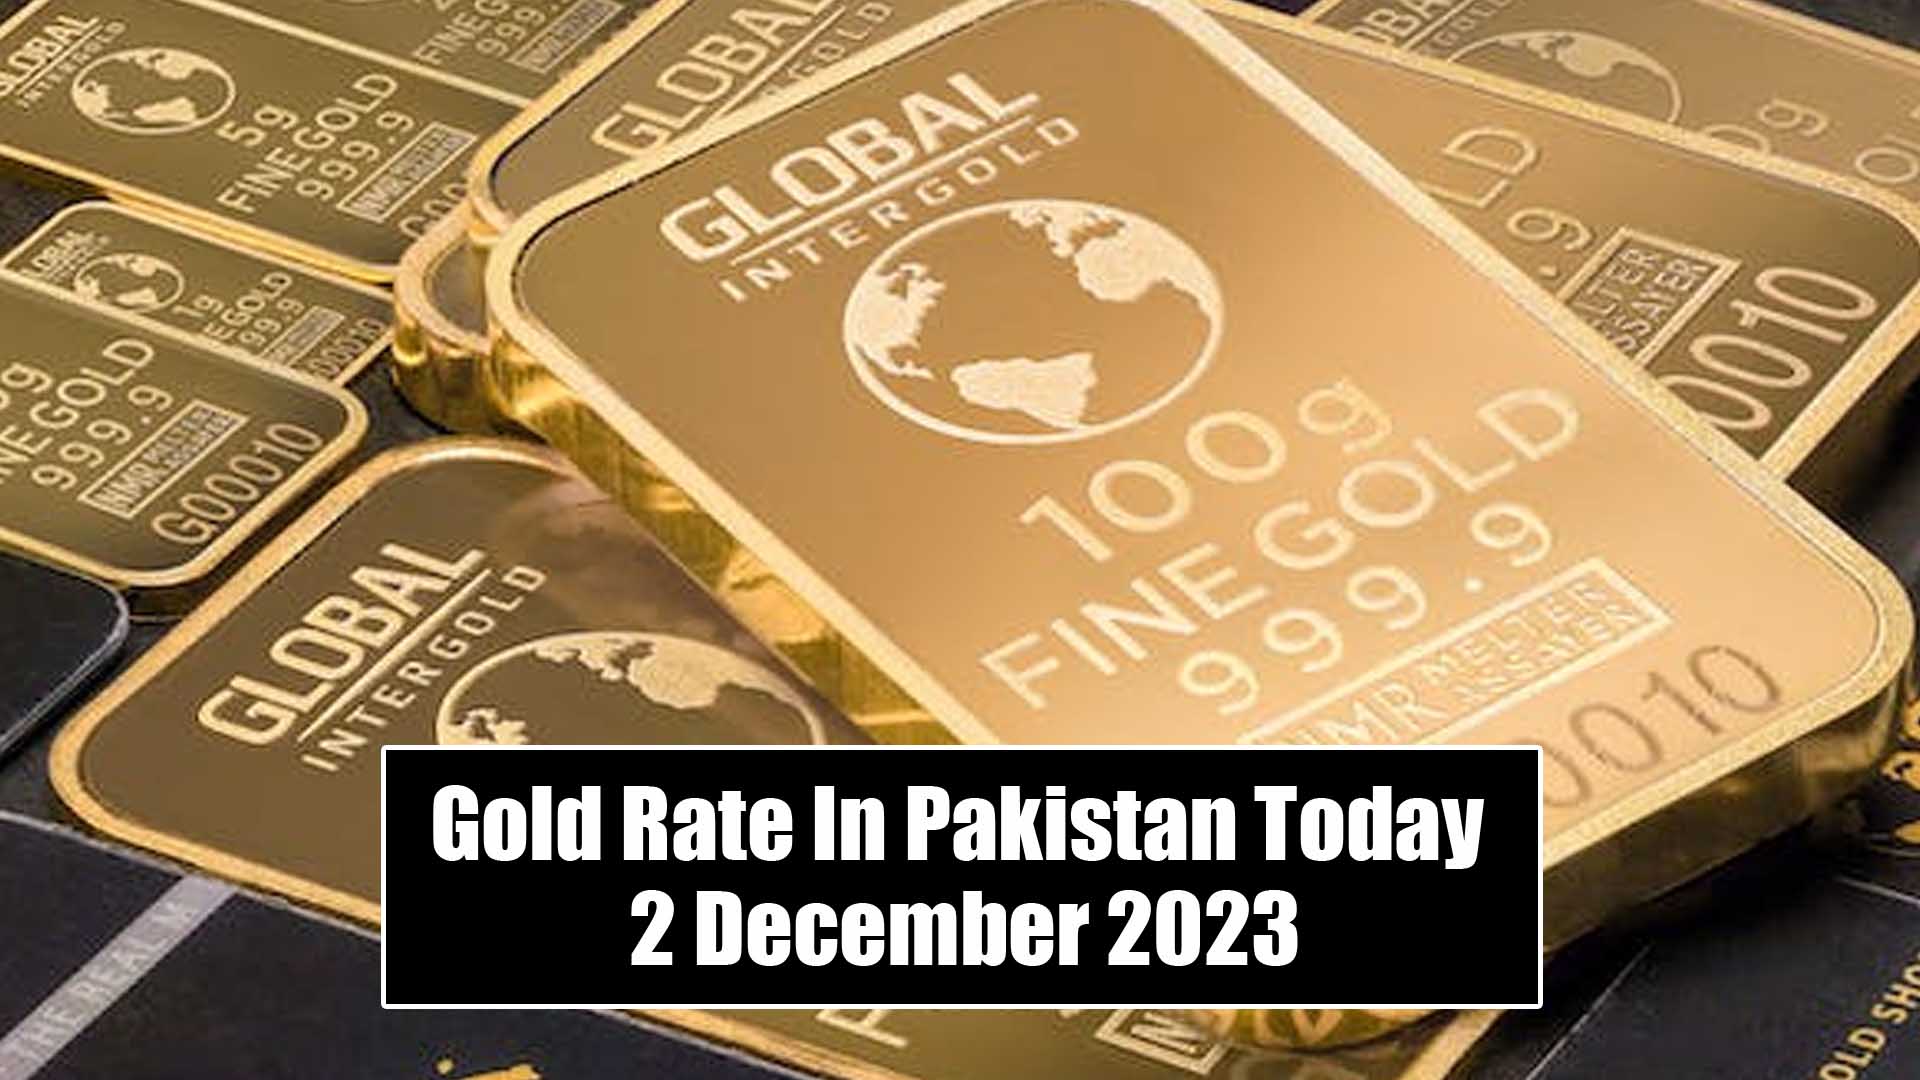 Gold Rate In Pakistan Today 2 December 2023